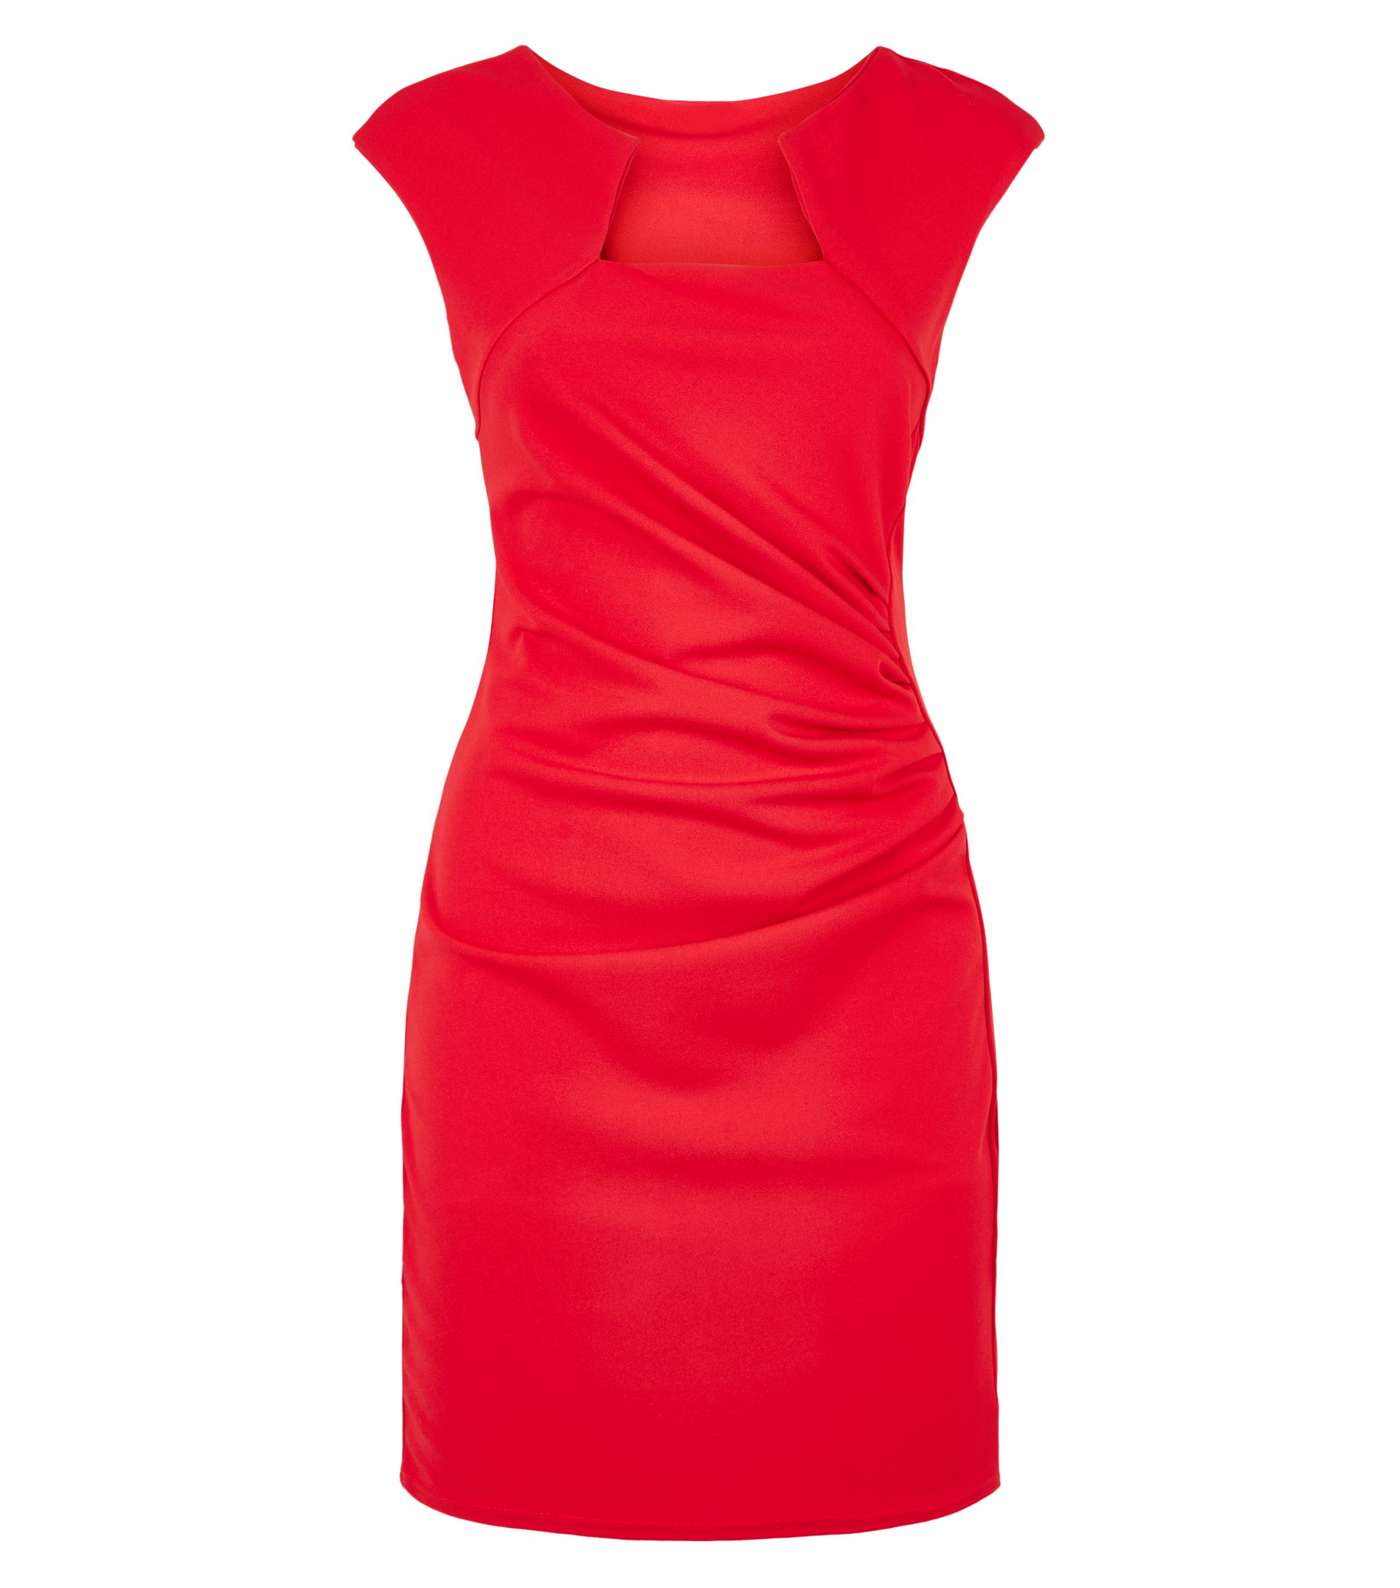 Missfiga Red Cap Sleeve Ruched Bodycon Dress Image 4